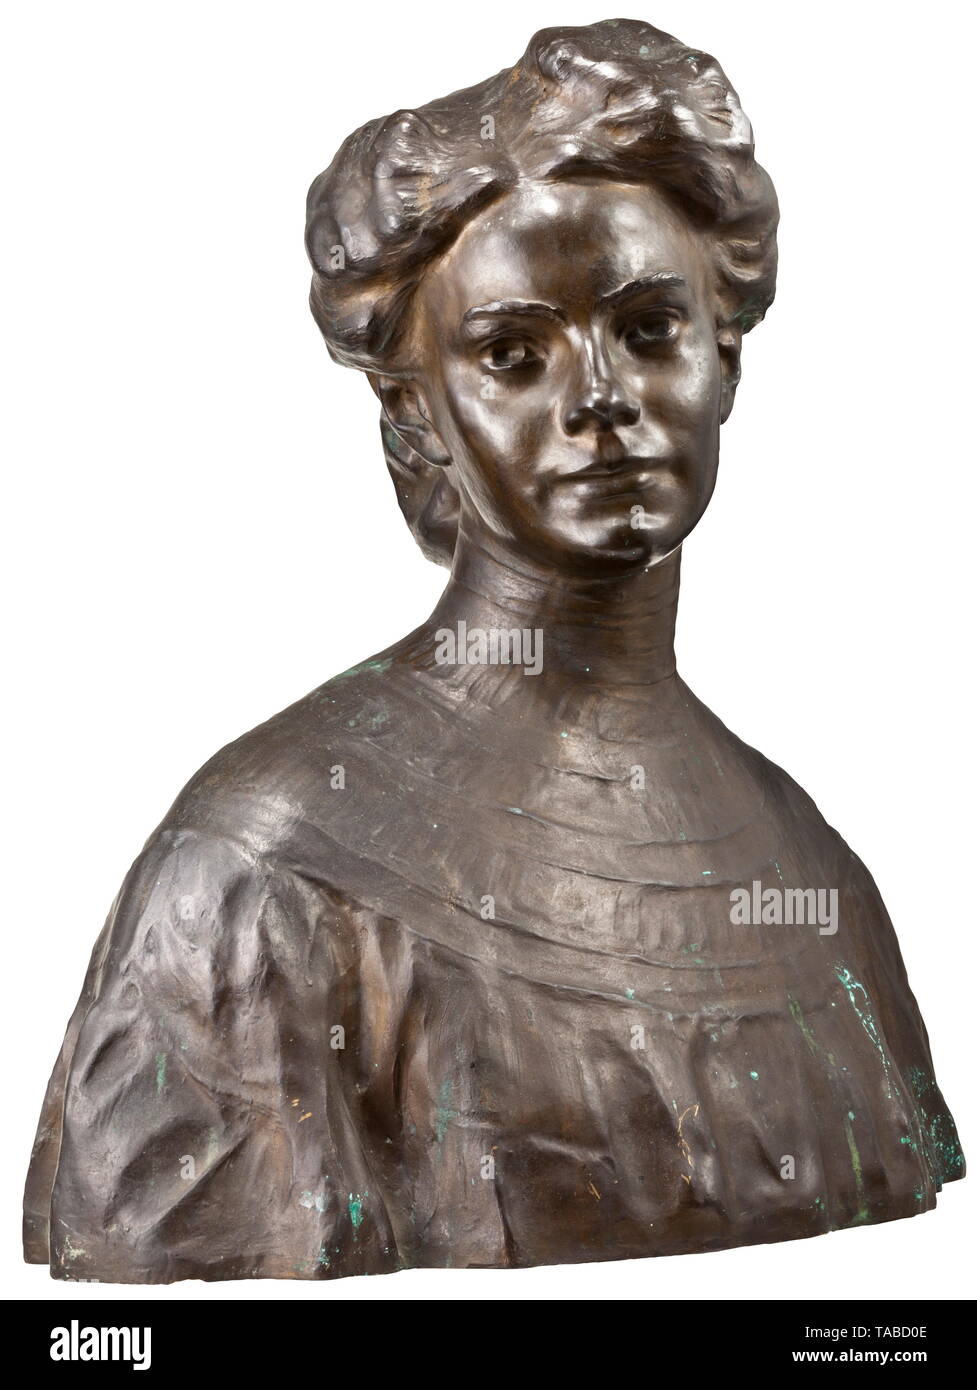 Alfred Hoffmann - 'Empress Elisabeth', Vienna, dated 1905 Bust in patinated bronze. A depiction of the empress in middle-age, her head inclined slightly to the side. The reverse signed 'Alf. Hofmann 1905'. Surfaces lightly stained in places. Height 53 cm. Alfred Hofmann (1879 - 1958) was active in Vienna as a sculptor, medallist and gem cutter and was a member of the Vienna Secession from 1906 - 1939. Among other locations, his sculptures can be found today in the Vienna Museum of Art History, the Austrian Belvedere Gallery and the Municipal Muse, Additional-Rights-Clearance-Info-Not-Available Stock Photo